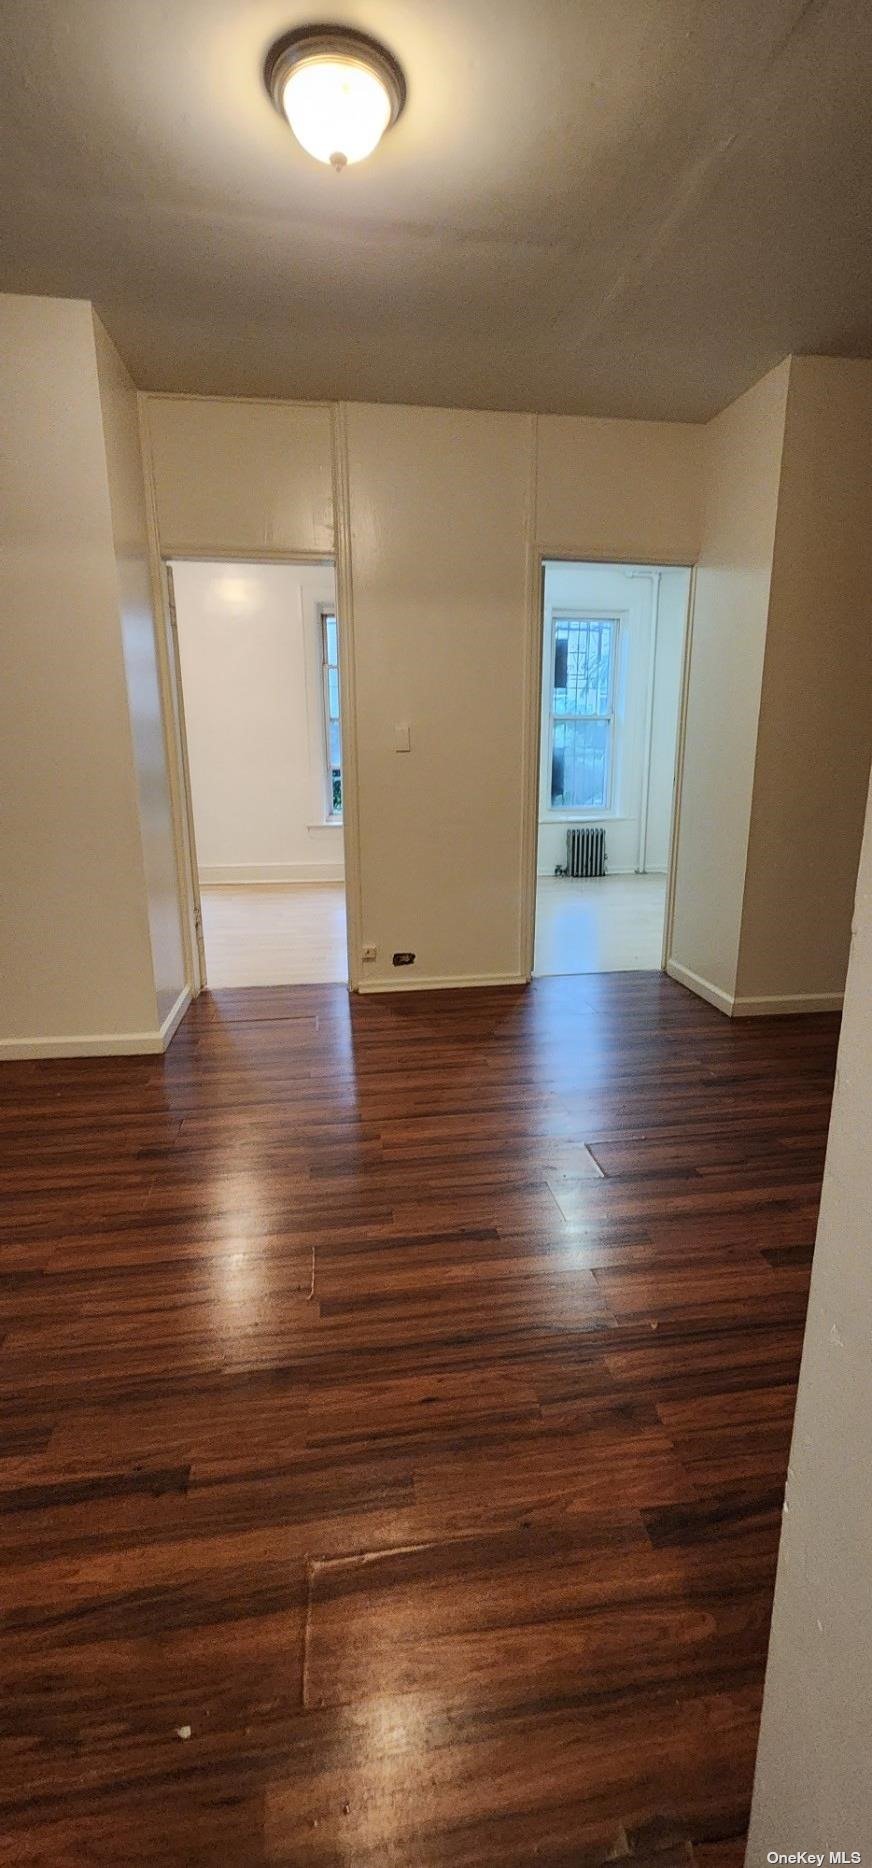 Apartment in Prospect Lefferts Gardens - Midwood  Brooklyn, NY 11225